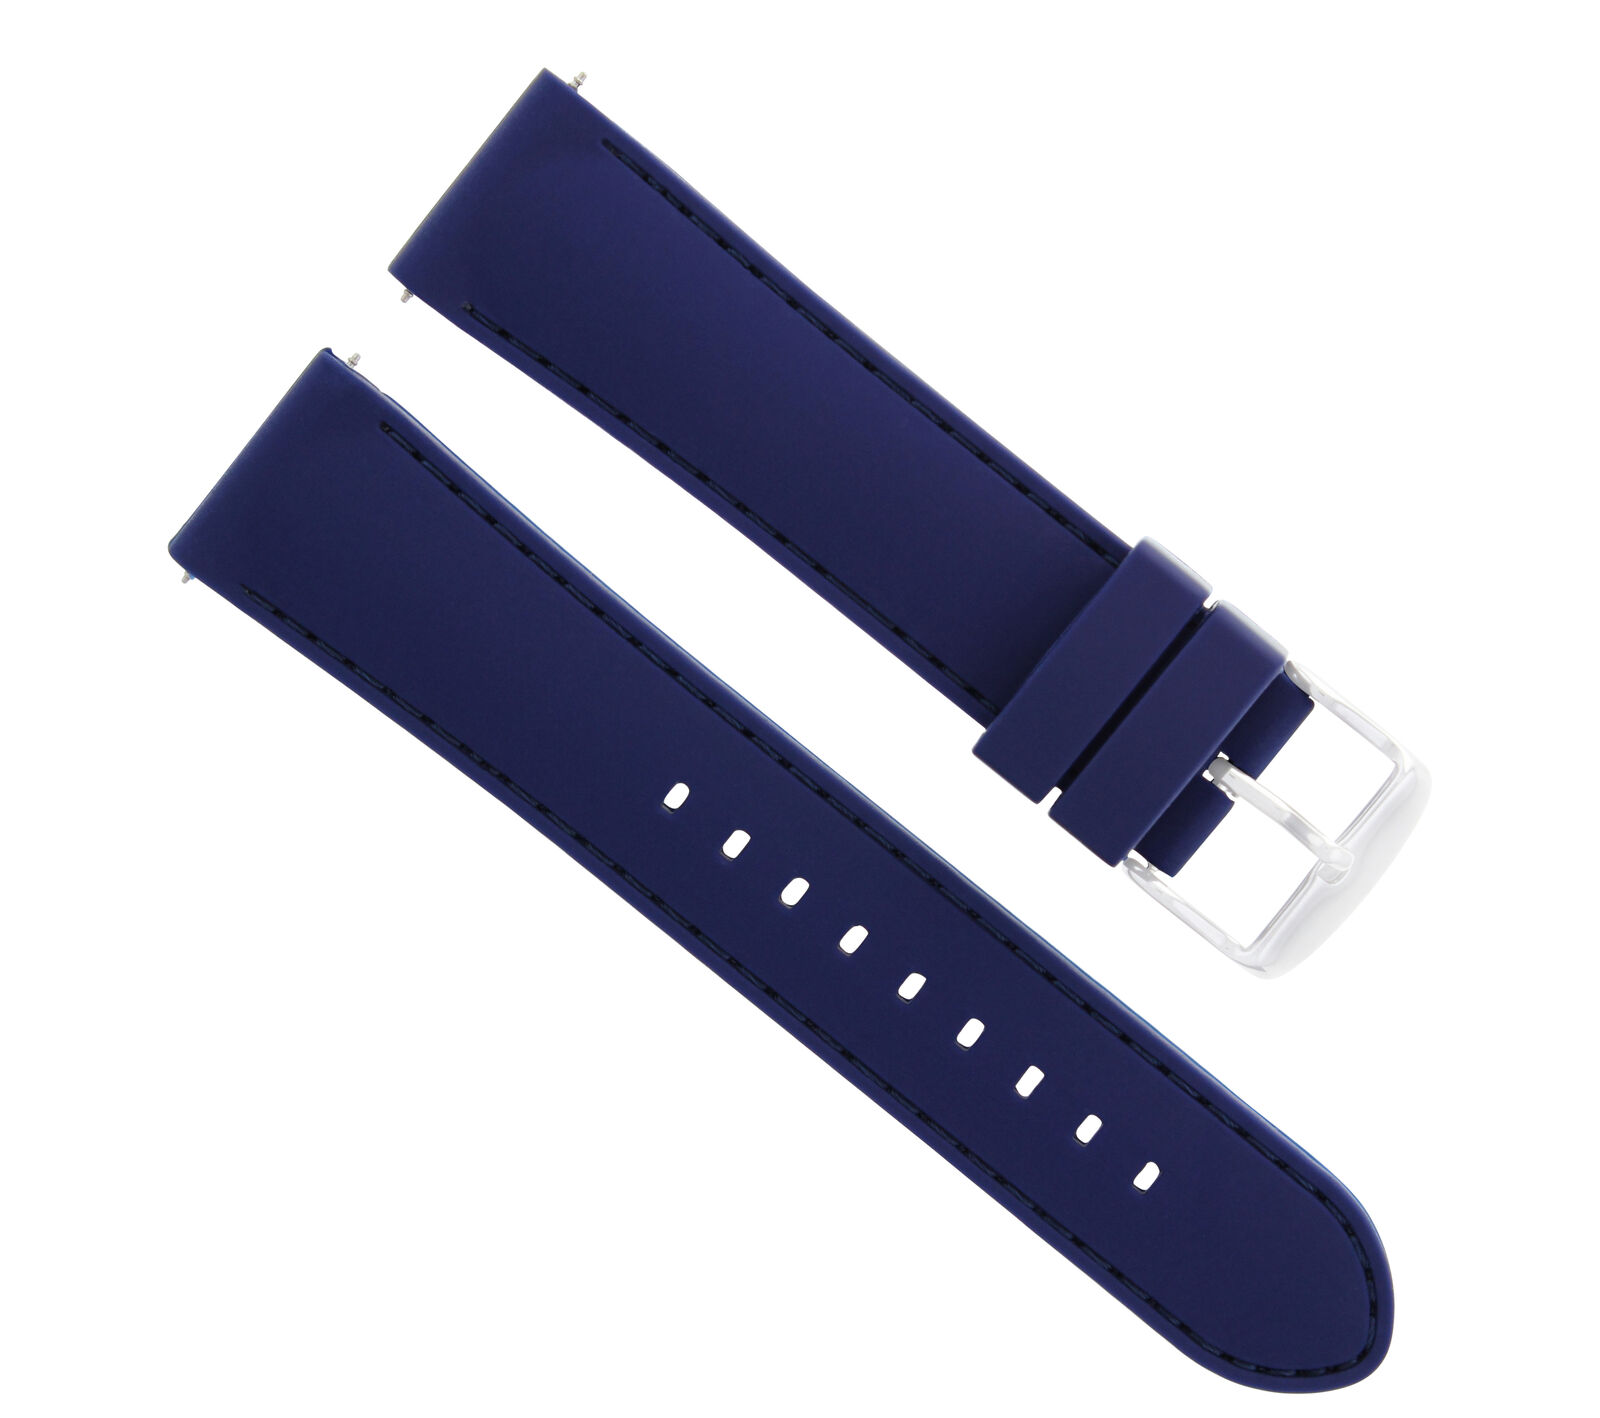 22MM SOFT RUBBER DIVER WATCH BAND STRAP FOR GUCCI WATCH BLUE